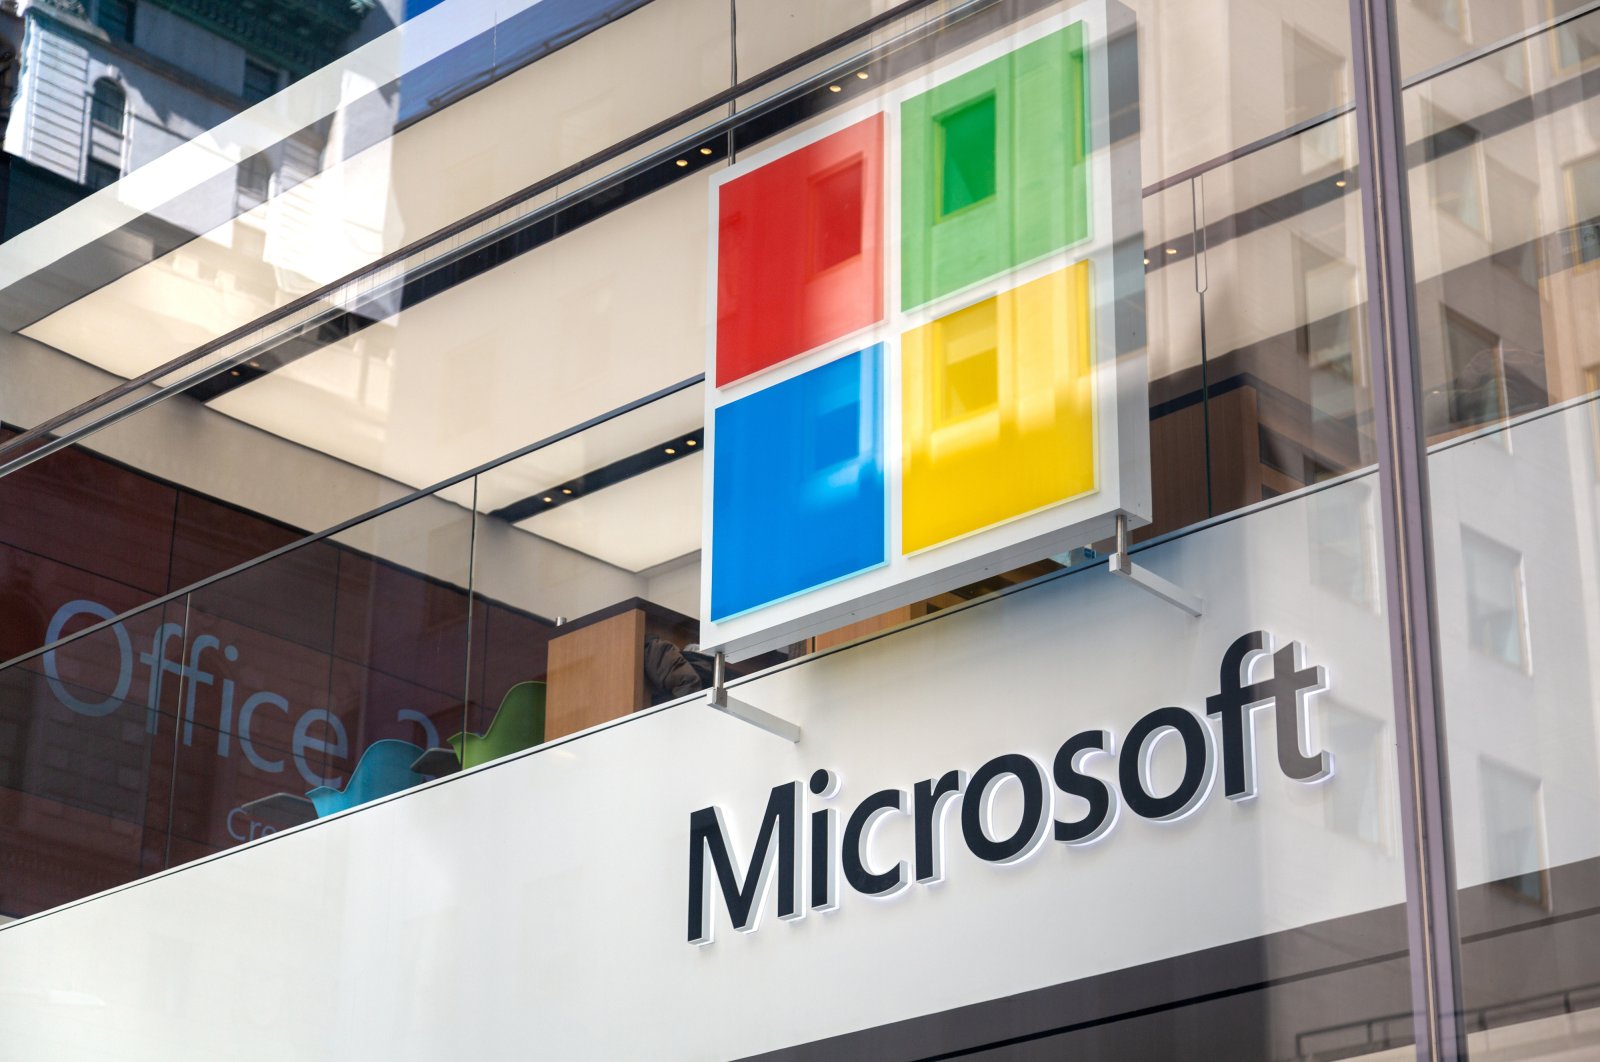 The Microsoft logo in front of a company building, Manhattan, New York, the U.S., Aug. 4, 2019. (Shutterstock Photo)